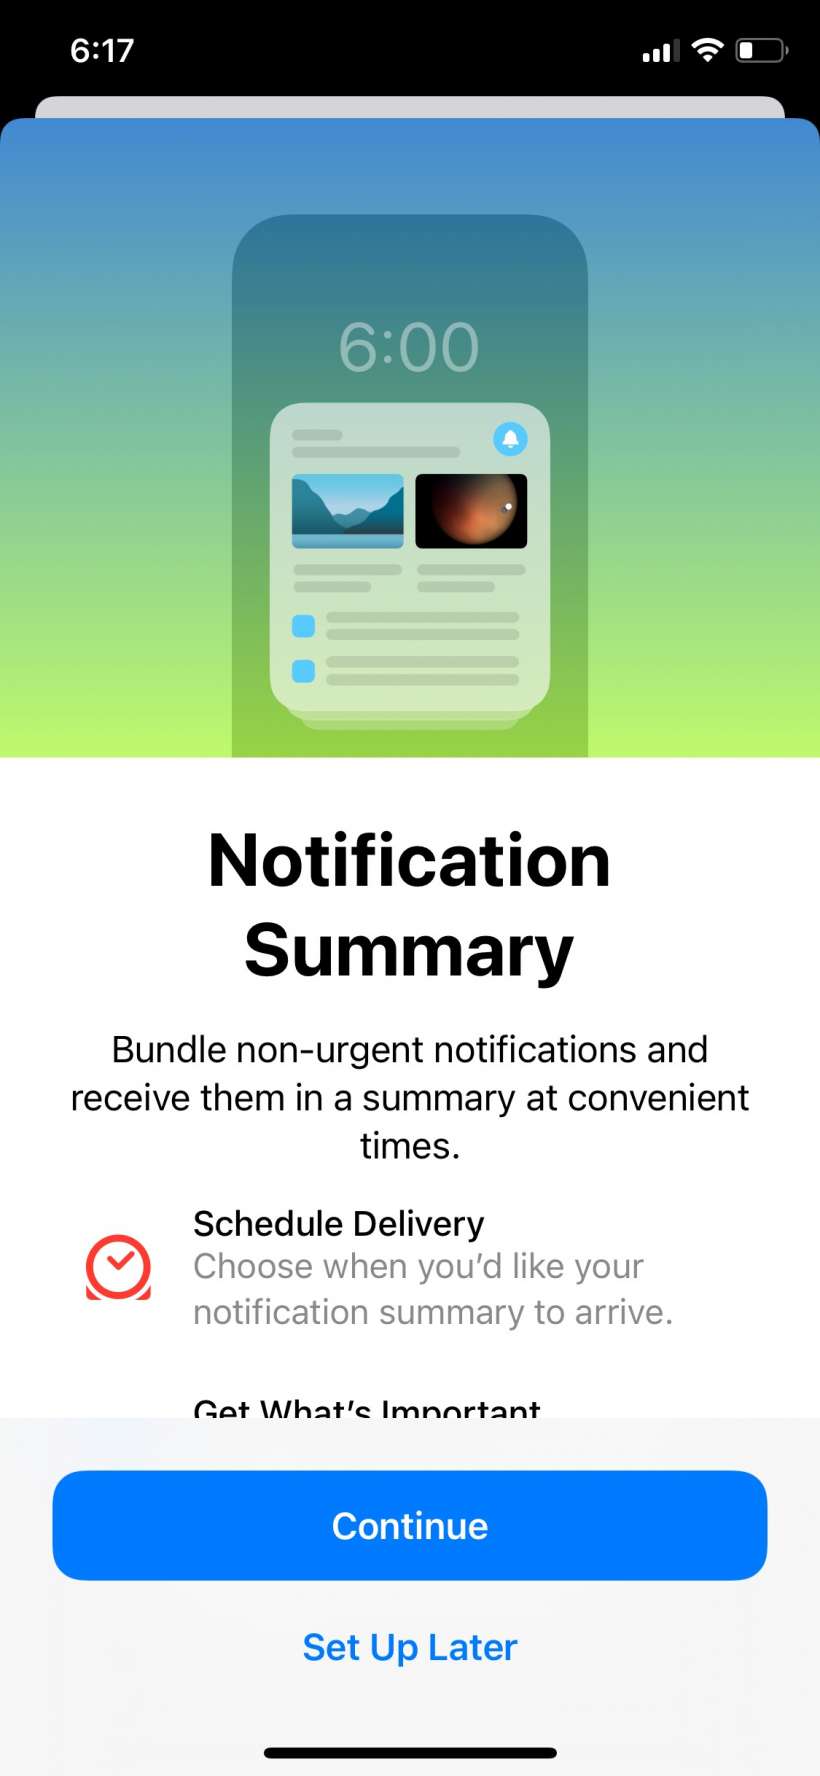 How to set up Notification Summary on iPhone and iPad.